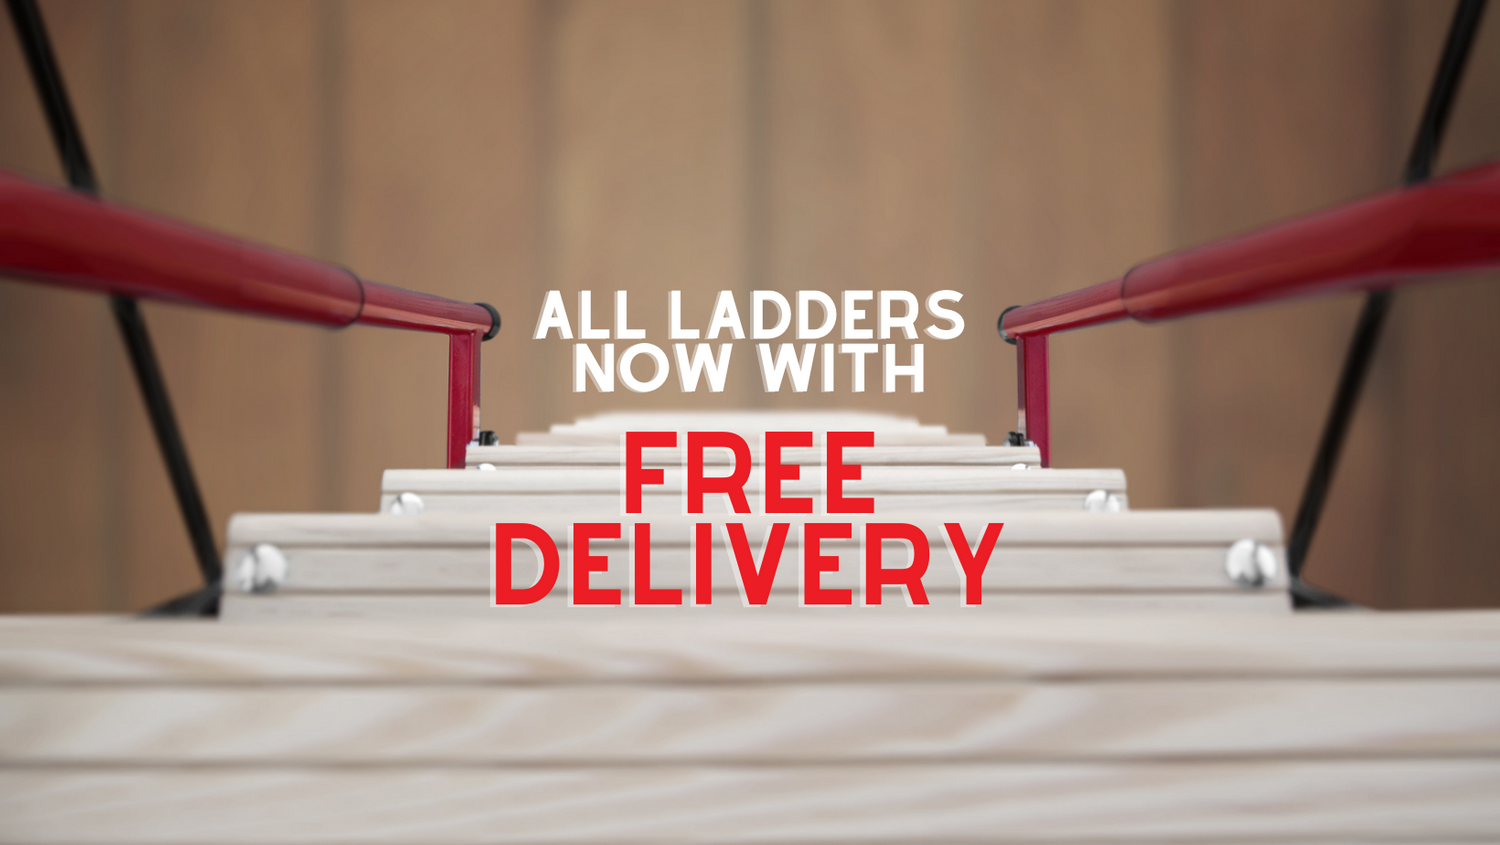 Attic Ladder free delivery